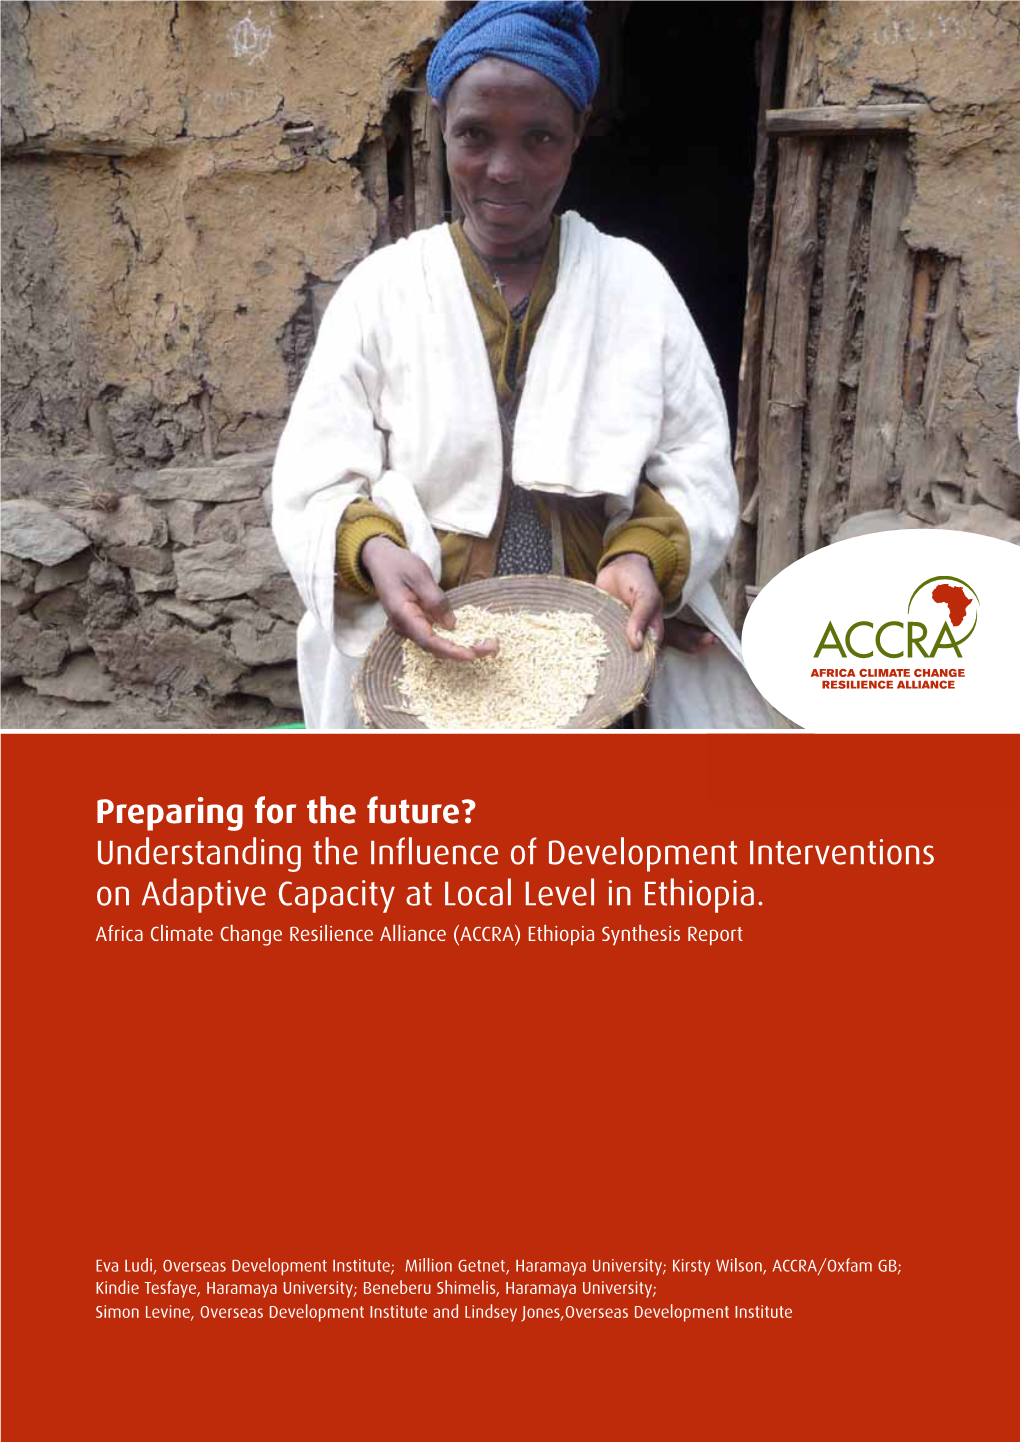 Preparing for the Future? Understanding the Influence of Development Interventions on Adaptive Capacity at Local Level in Ethiopia